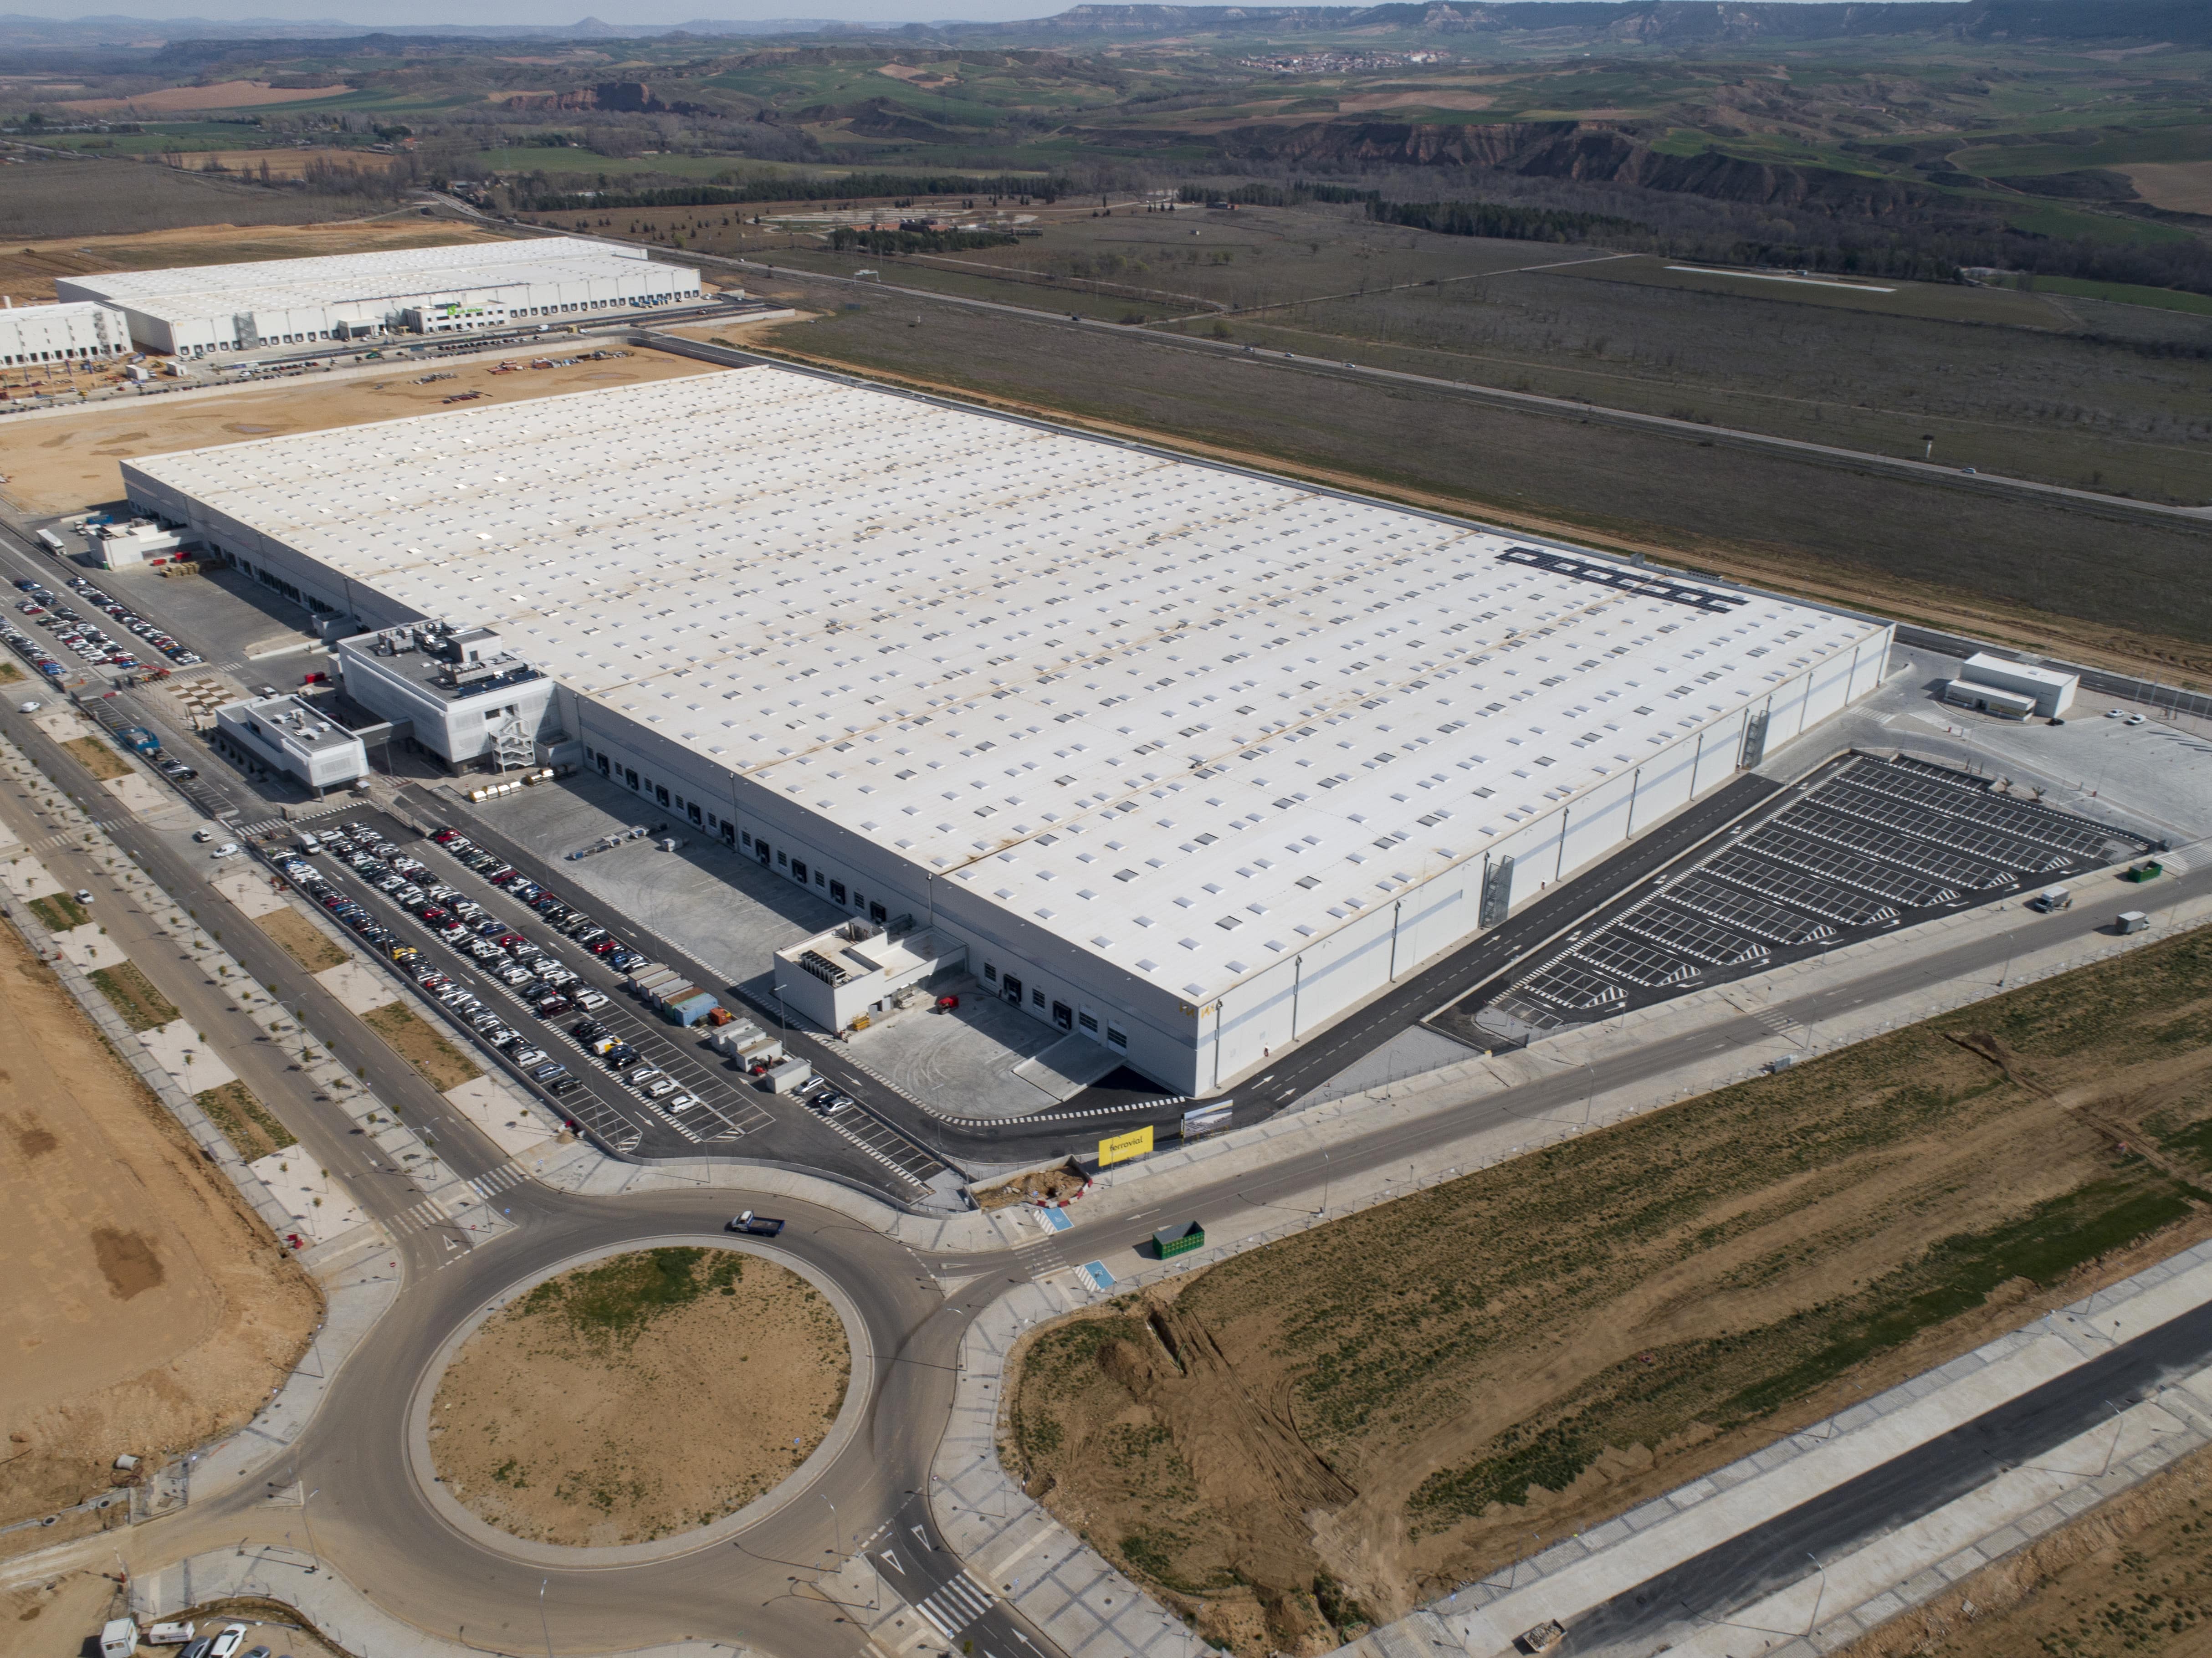 Roof of the XPO Logistics platform in Spain waterproofed with the Elevate UltraPly TPO membrane